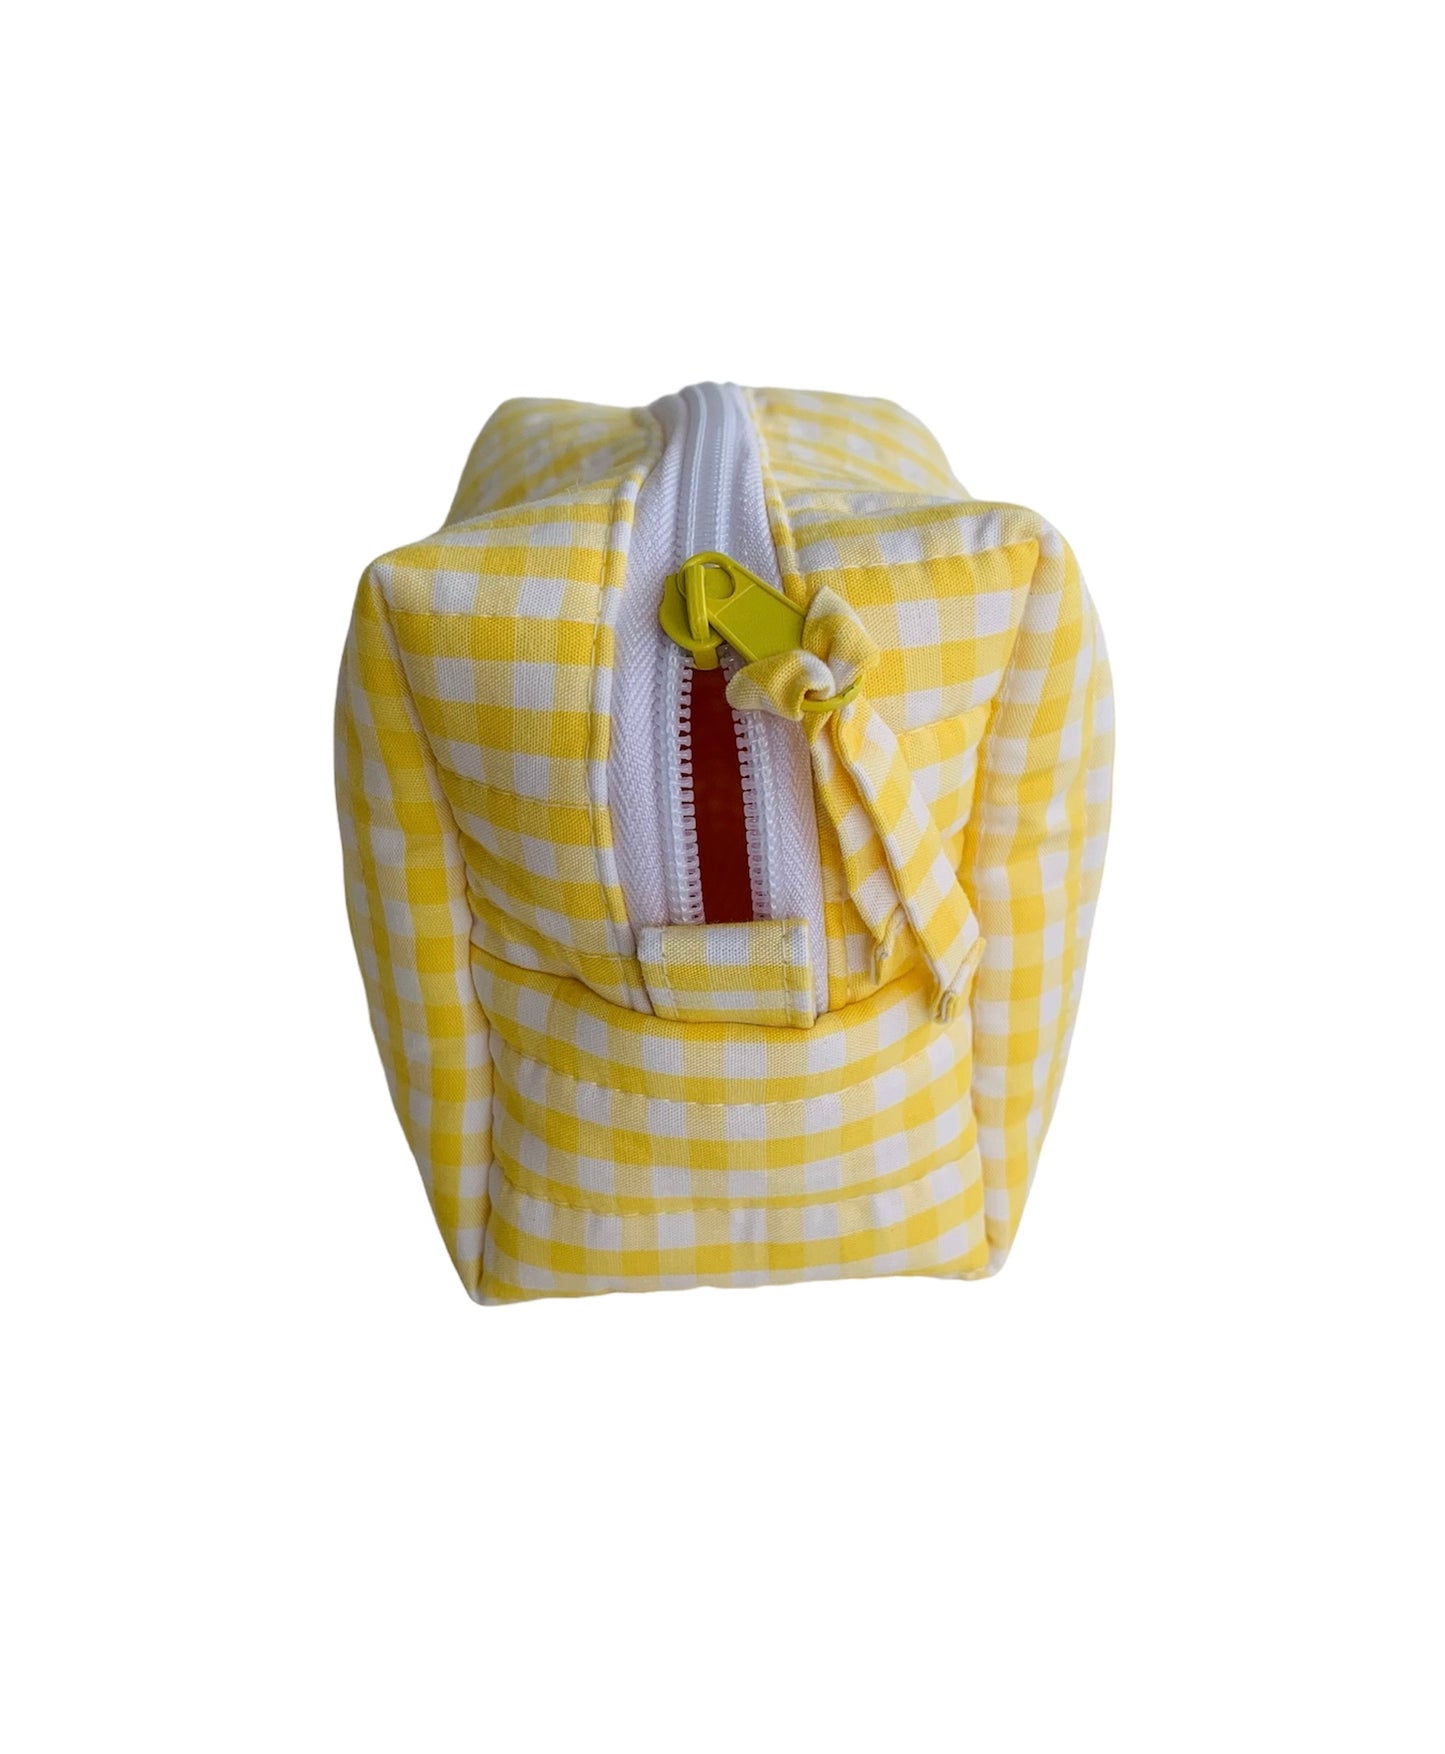 Small Yellow Gingham Carry All Make Up Bag